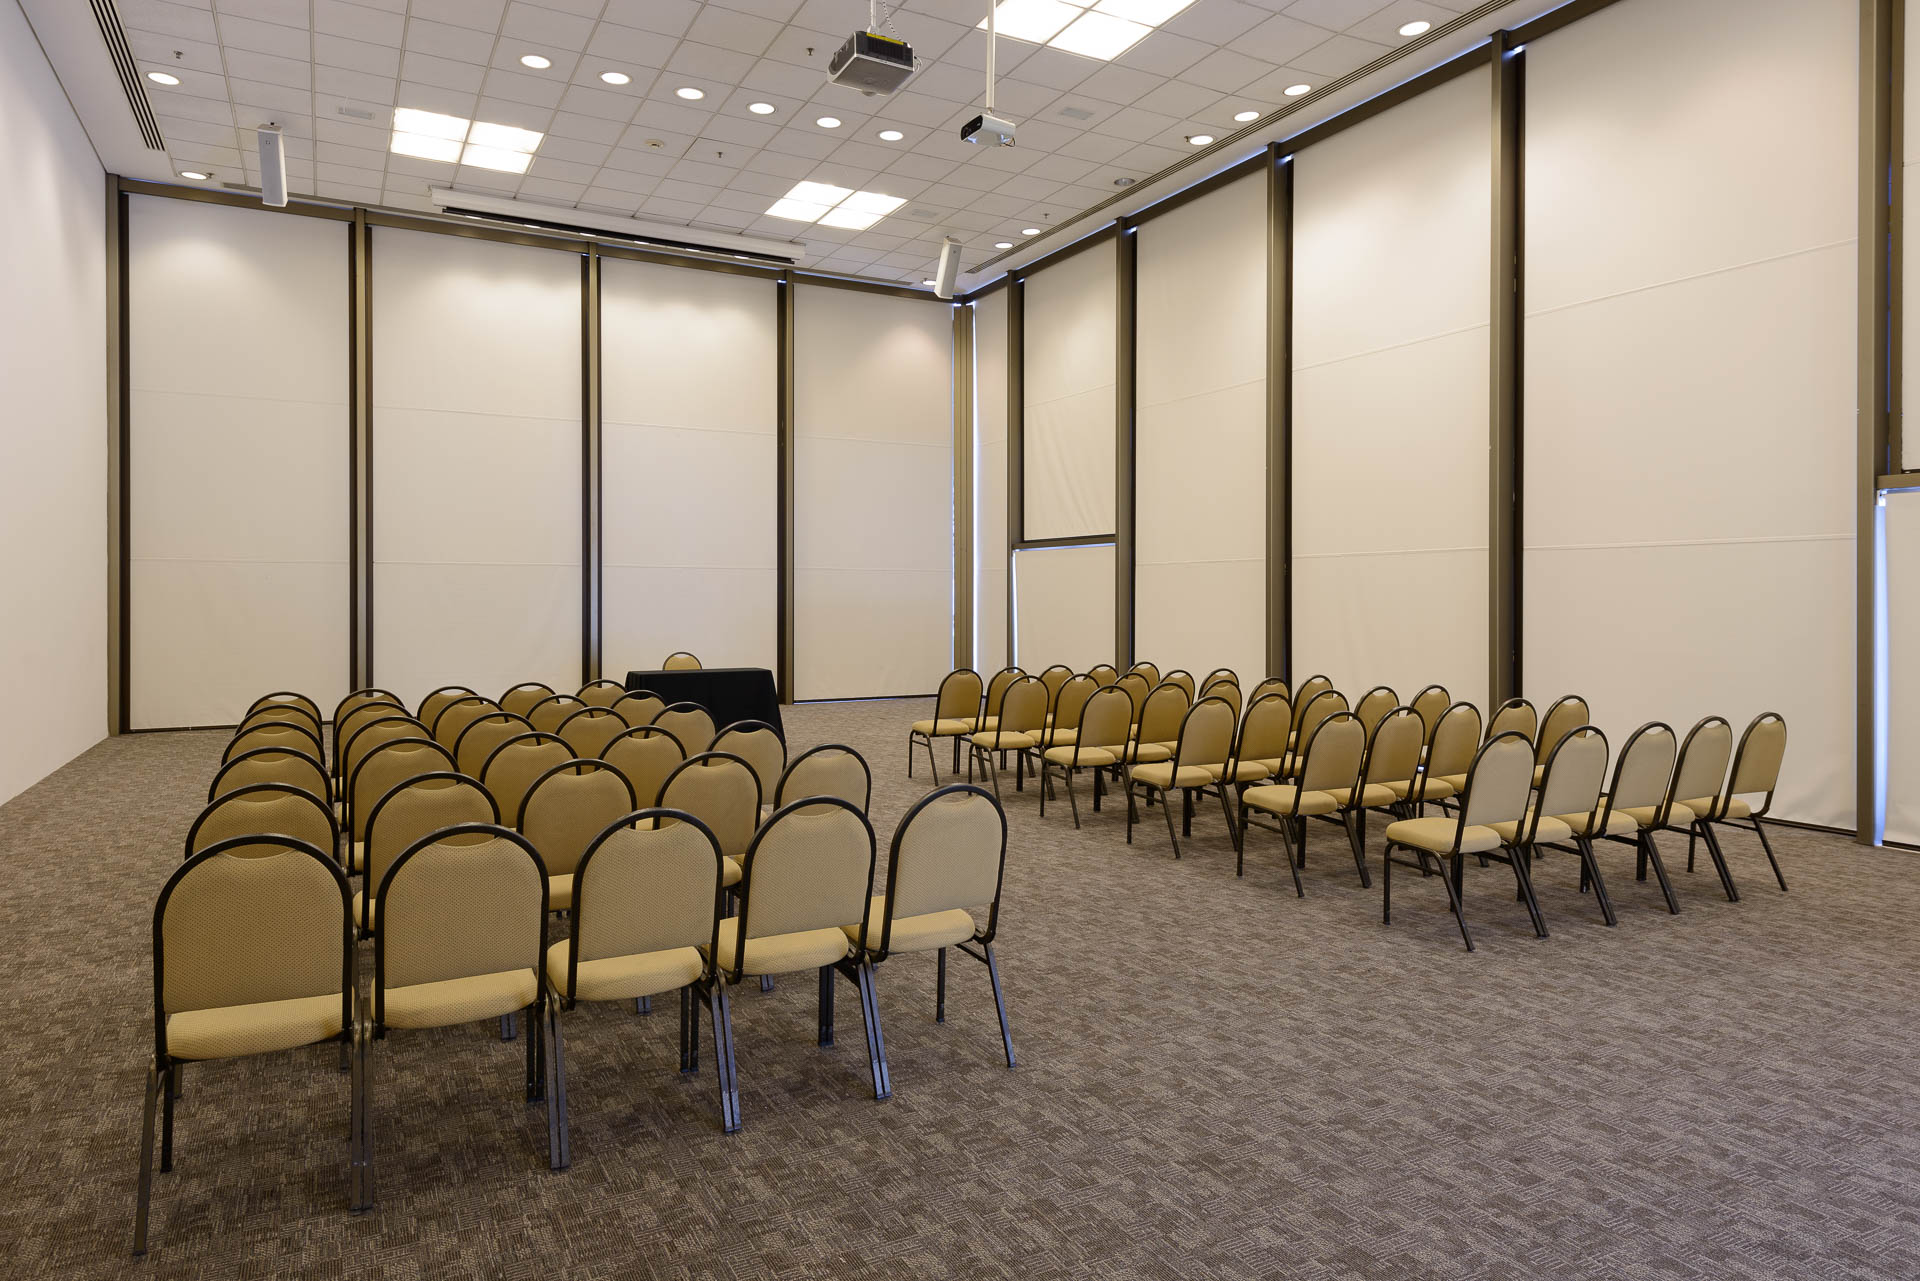 Faria Lima Financial Center conference  hall with several chairs